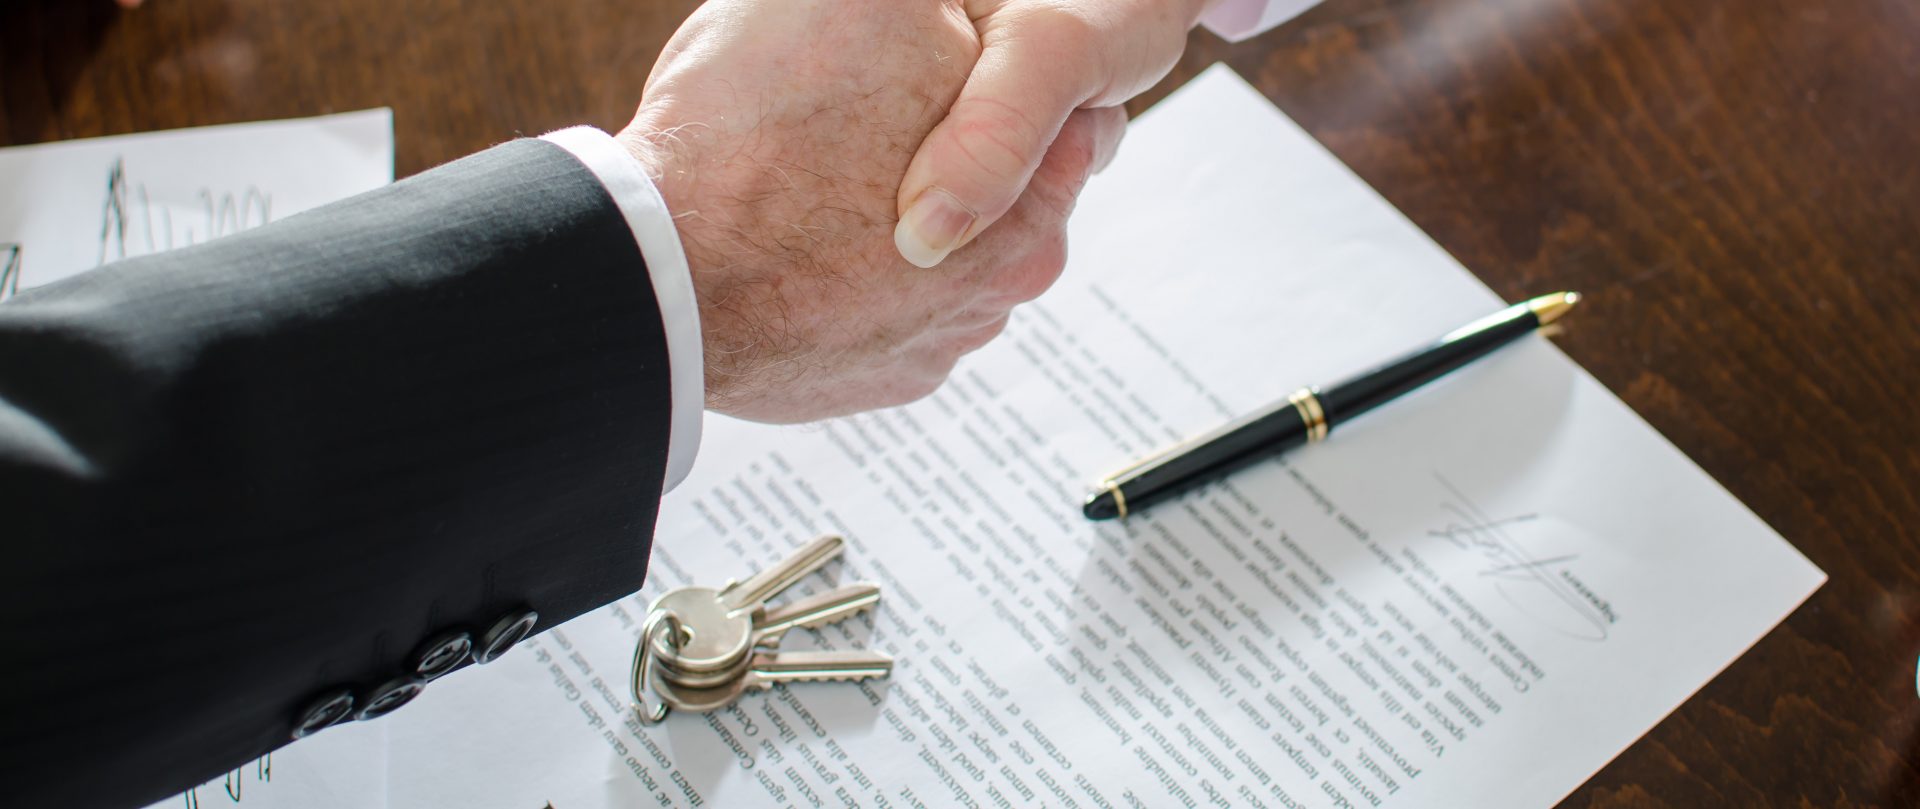 Property contracts - Pitfalls when paying deposits by instalments on a property purchase